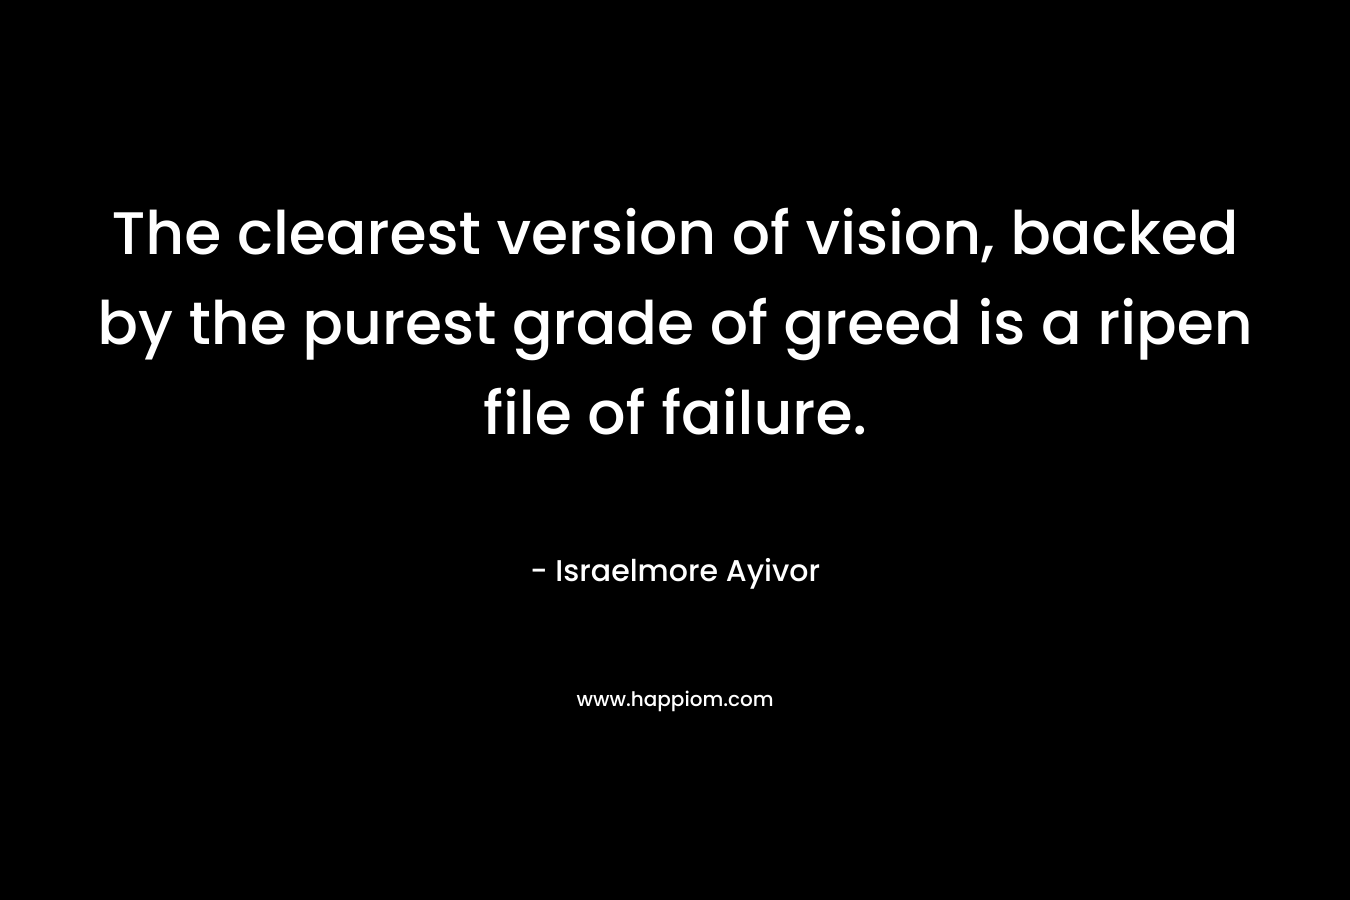 The clearest version of vision, backed by the purest grade of greed is a ripen file of failure. – Israelmore Ayivor